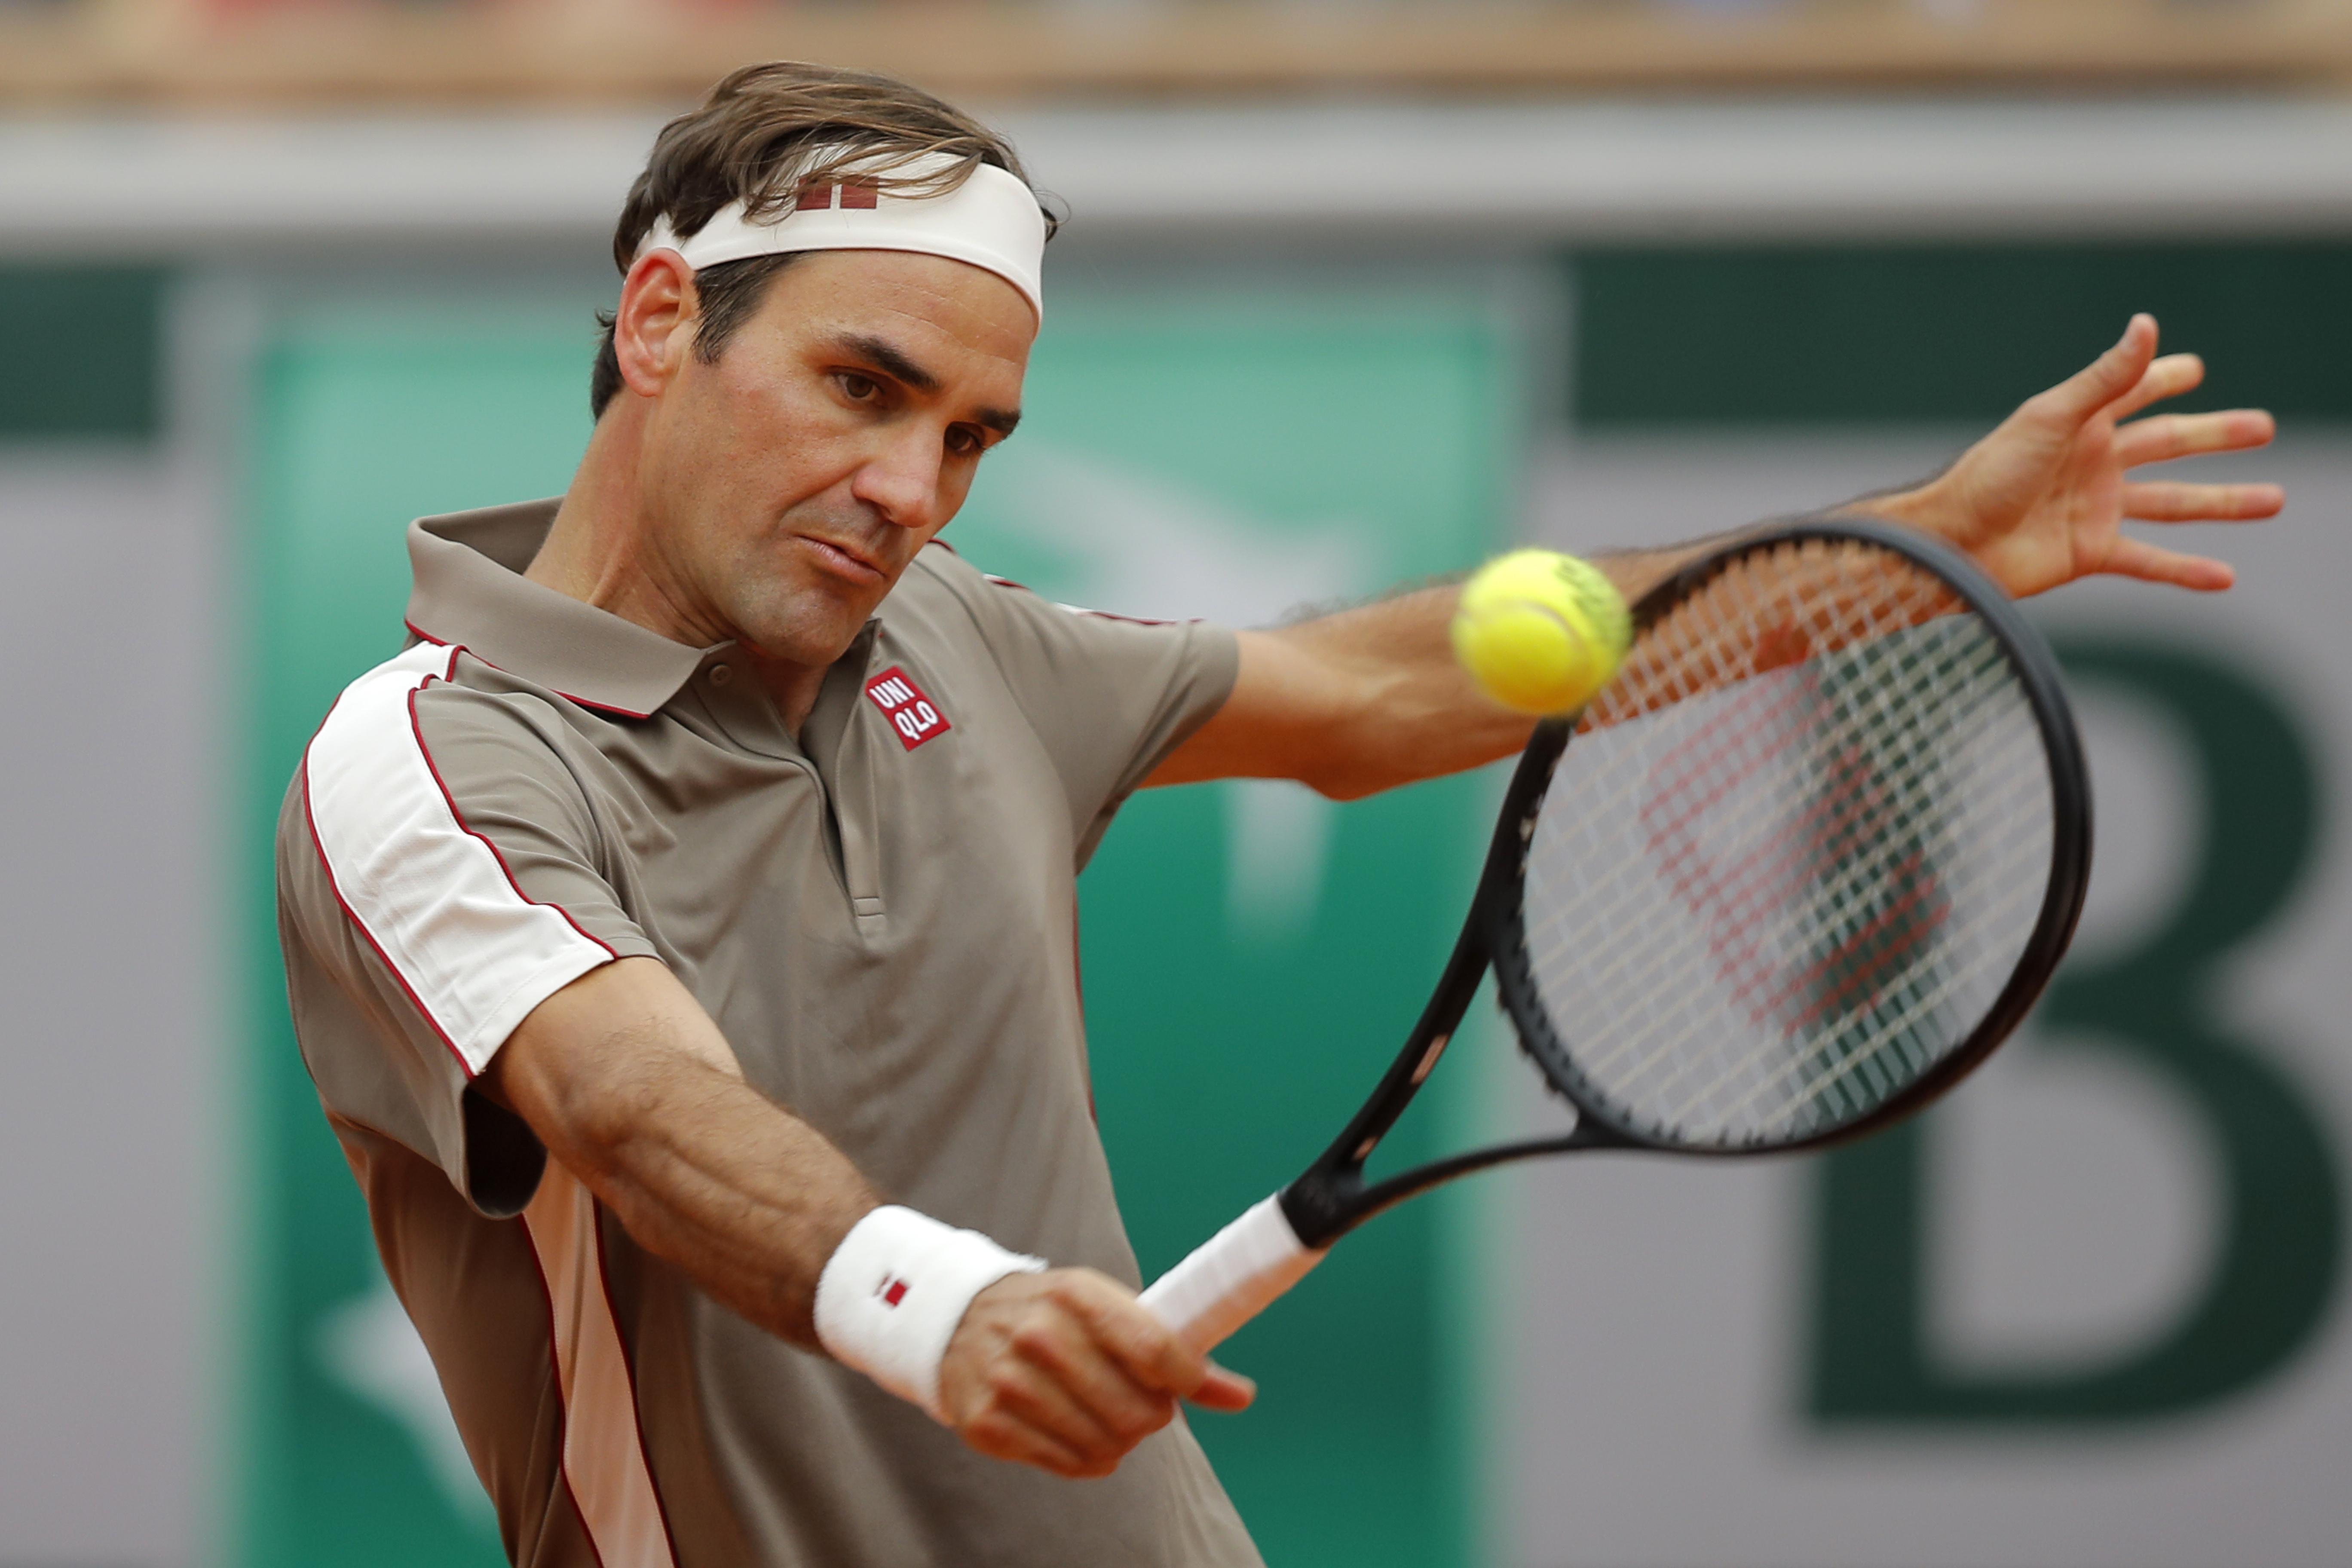 Roger Federer wins easily in first French Open match since 2015 | The Spokesman-Review